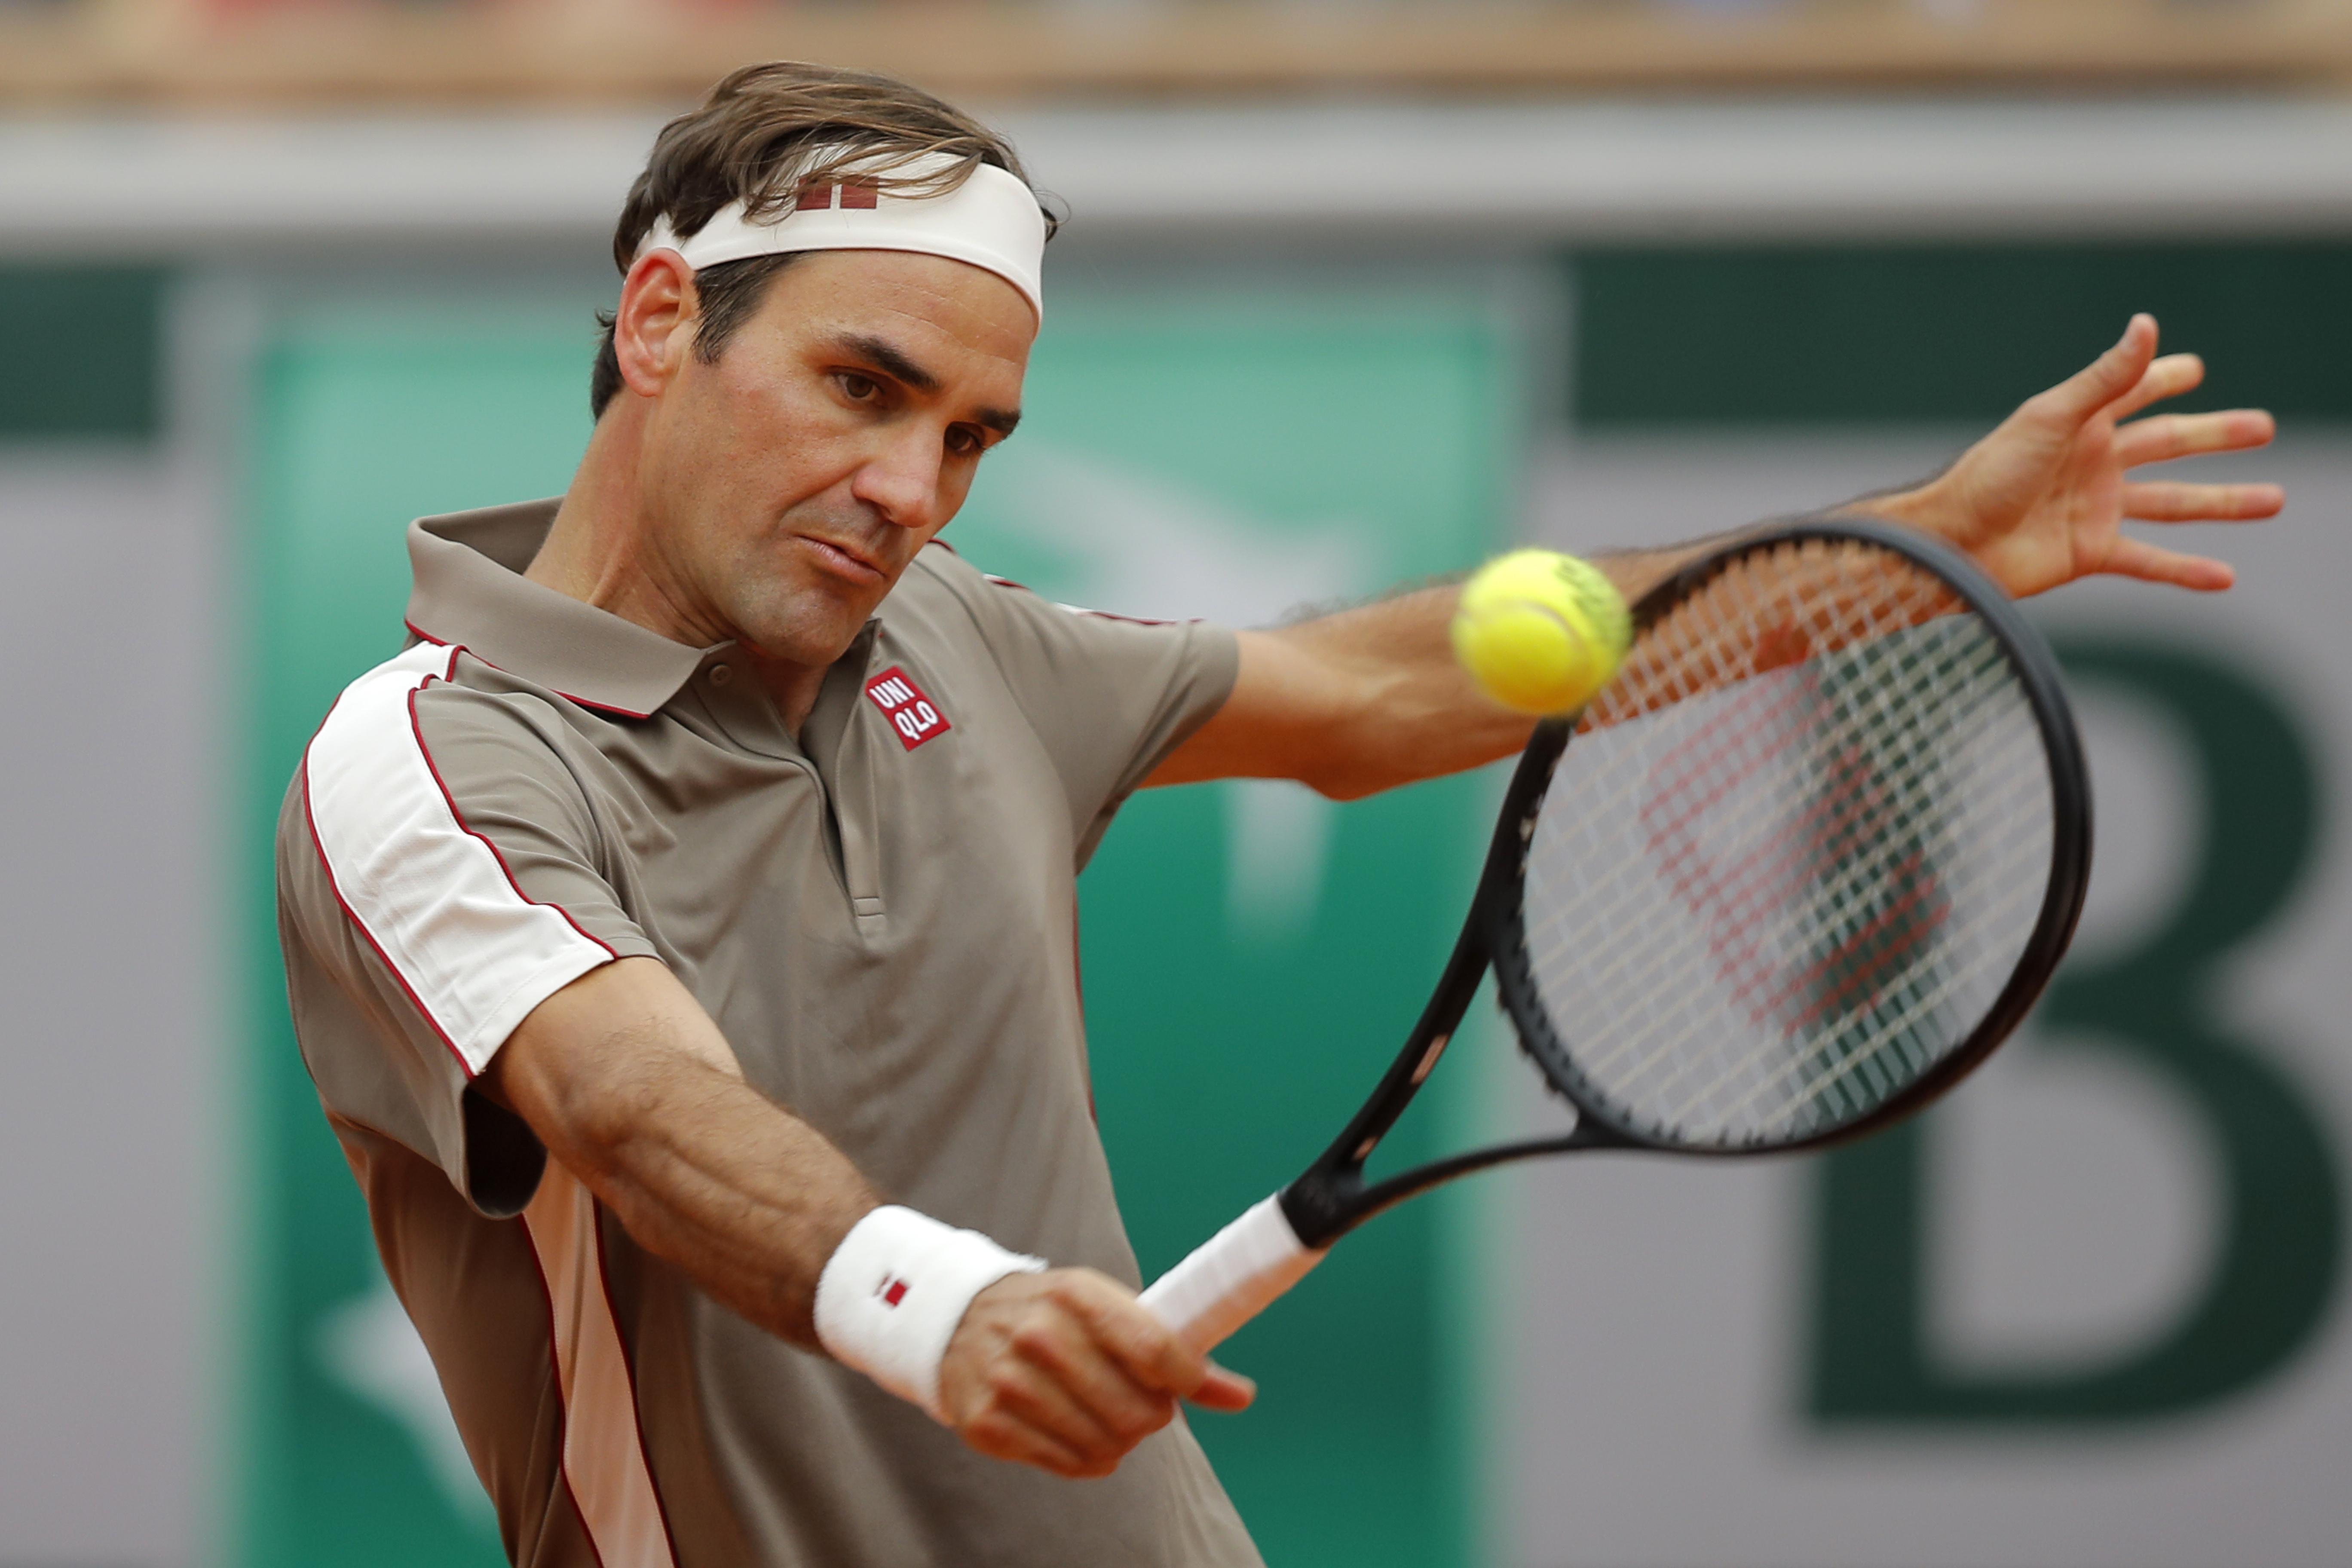 Roger Federer wins easily in first French Open match since 2015 | The Spokesman-Review